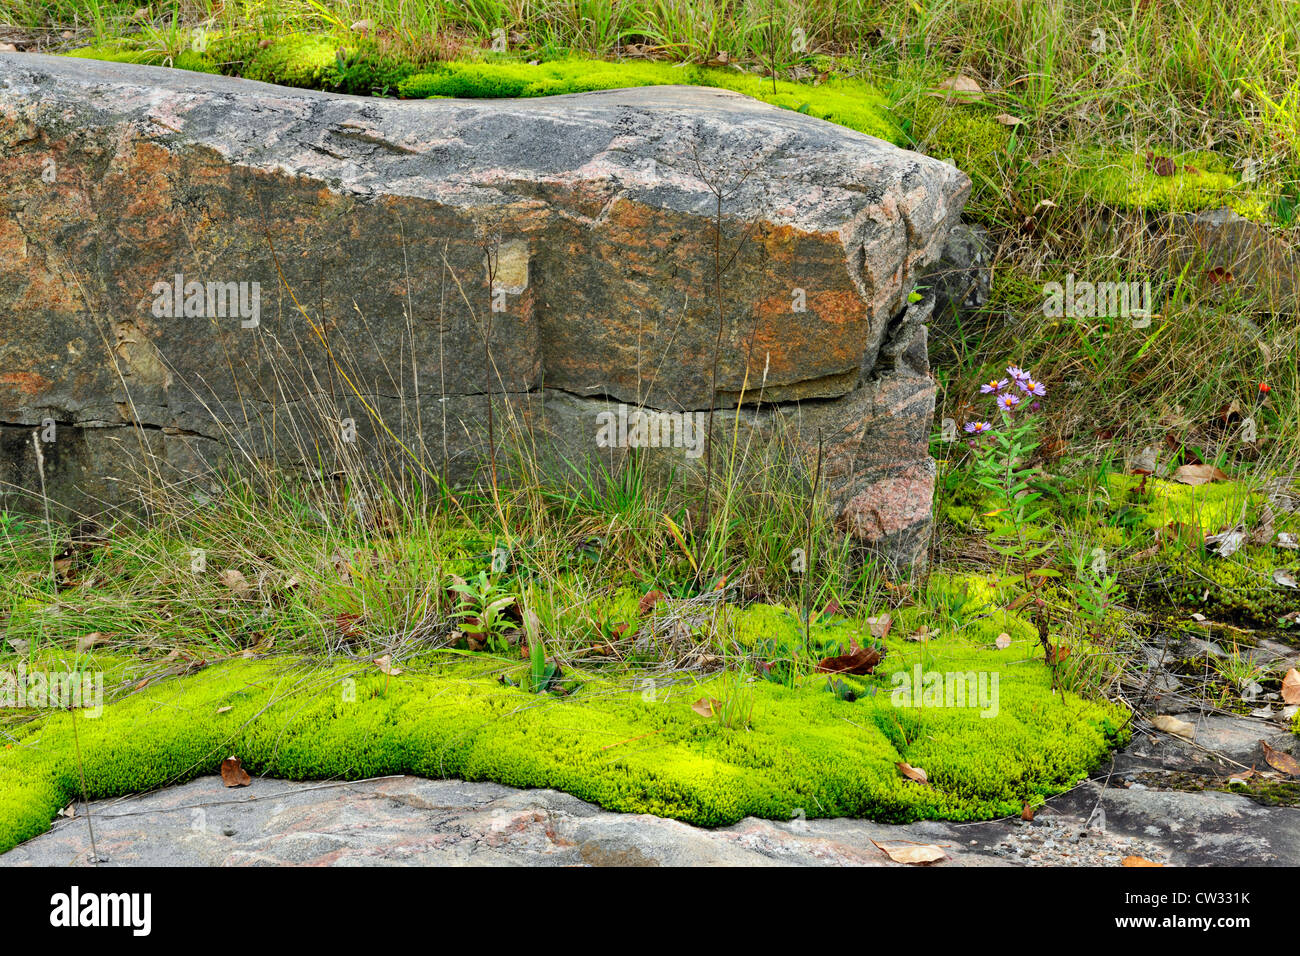 Pohlia moss colonies on granite outcrops with aster and grasses, Rosseau, Ontario, Canada Stock Photo